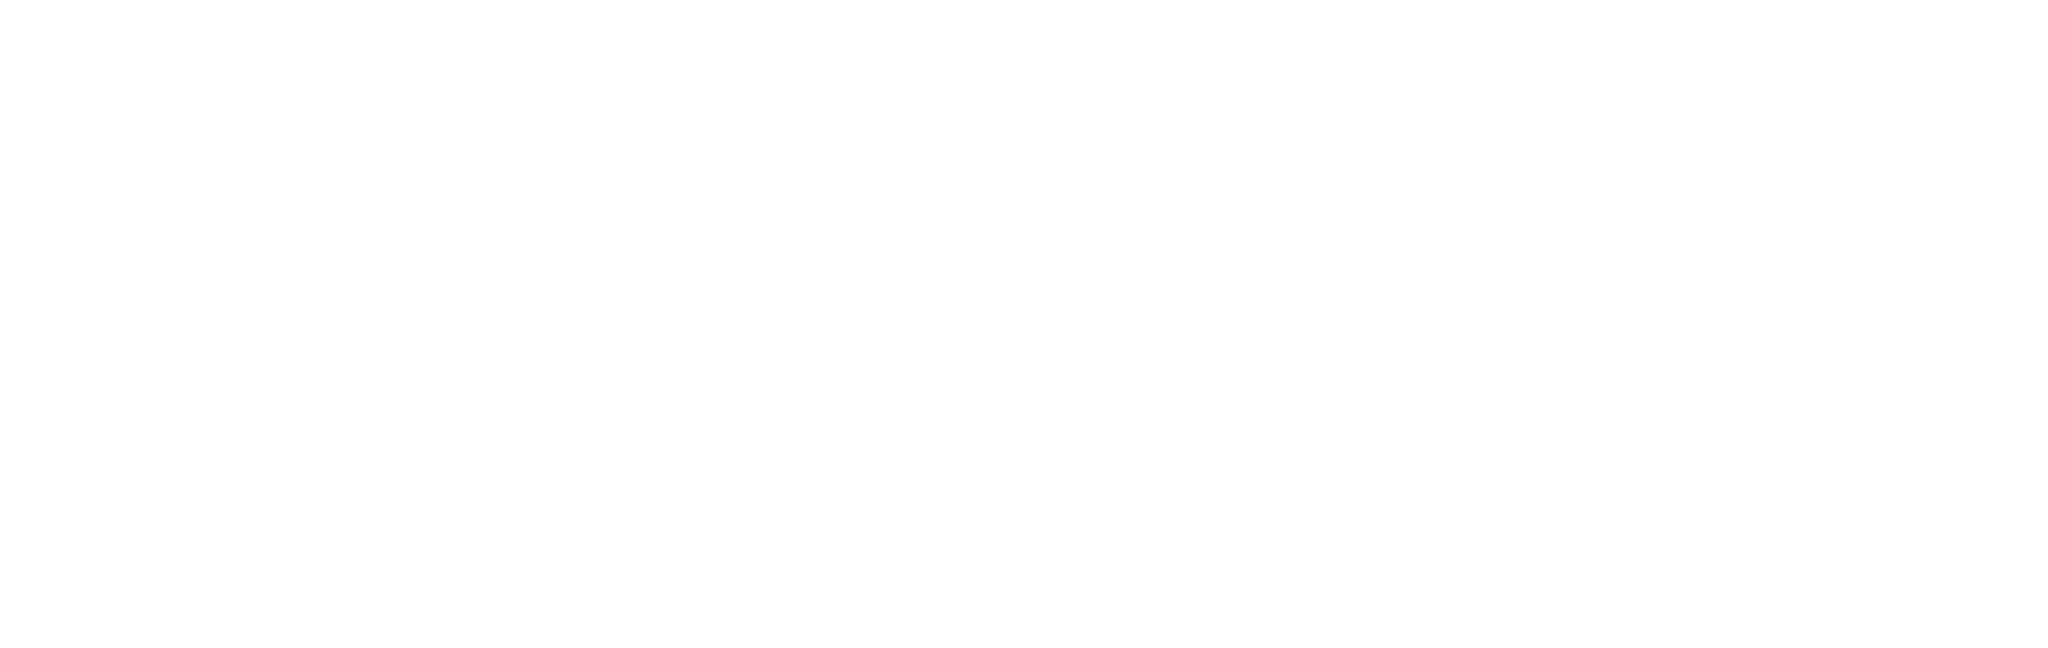 ISO 9001-2015 cGMP and FSSC 22000 certification icons